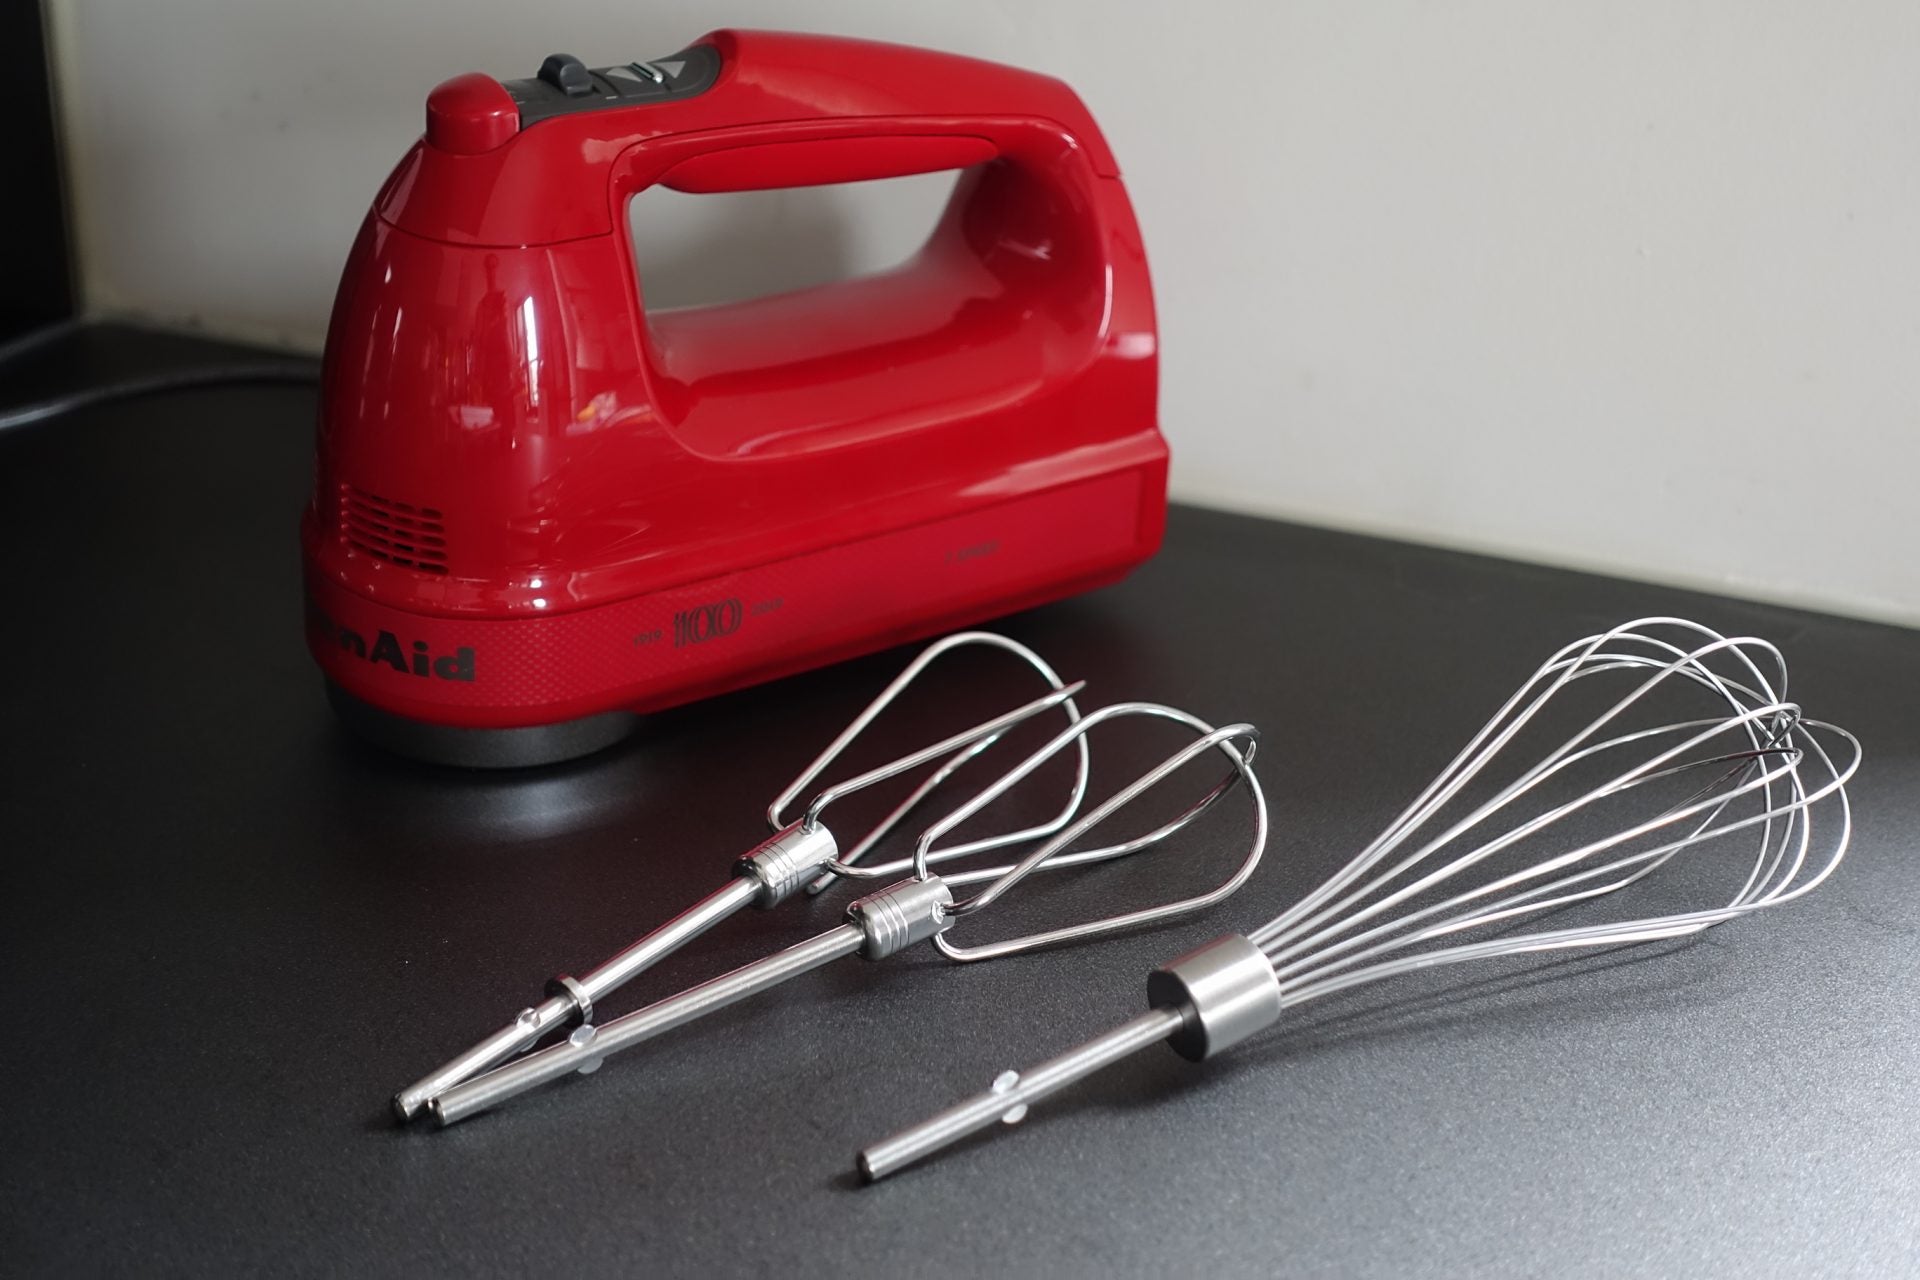 KitchenAid Queen of Hearts 7-Speed Hand Mixer Review | Trusted Reviews